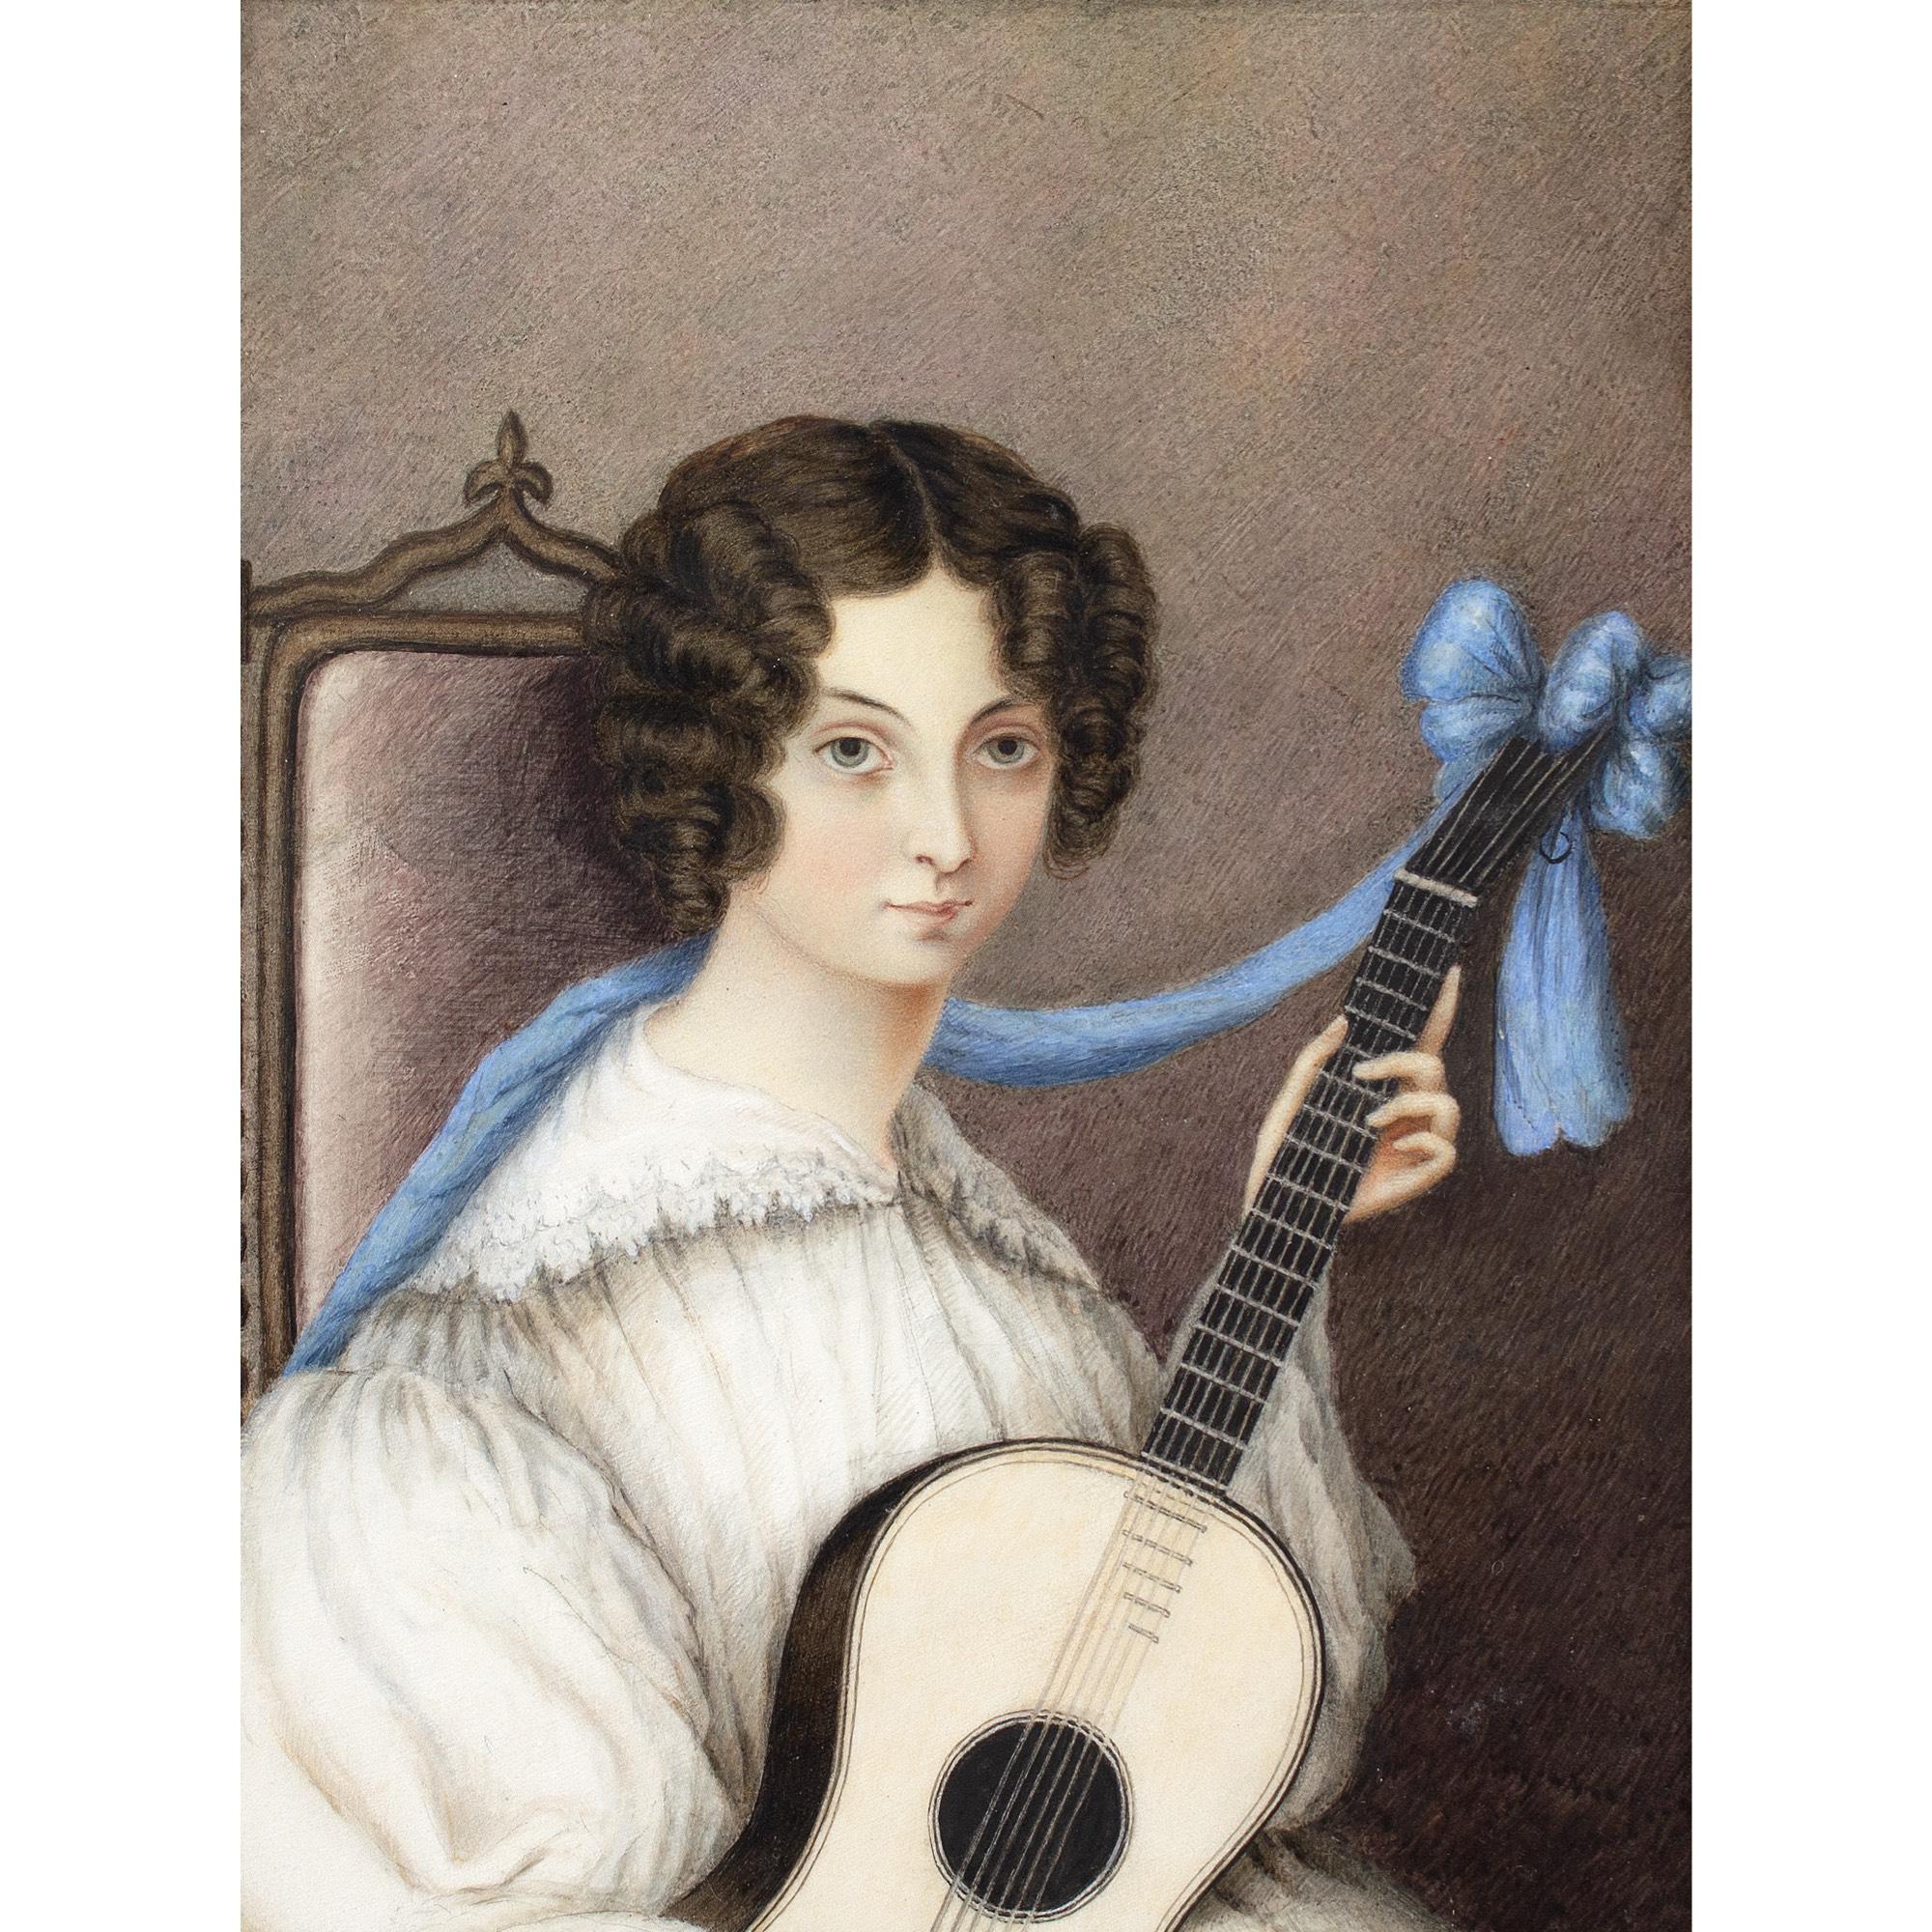 Early 19th-Century English School, Portrait Of A Young Lady With A Guitar - Folk Art Art by Unknown